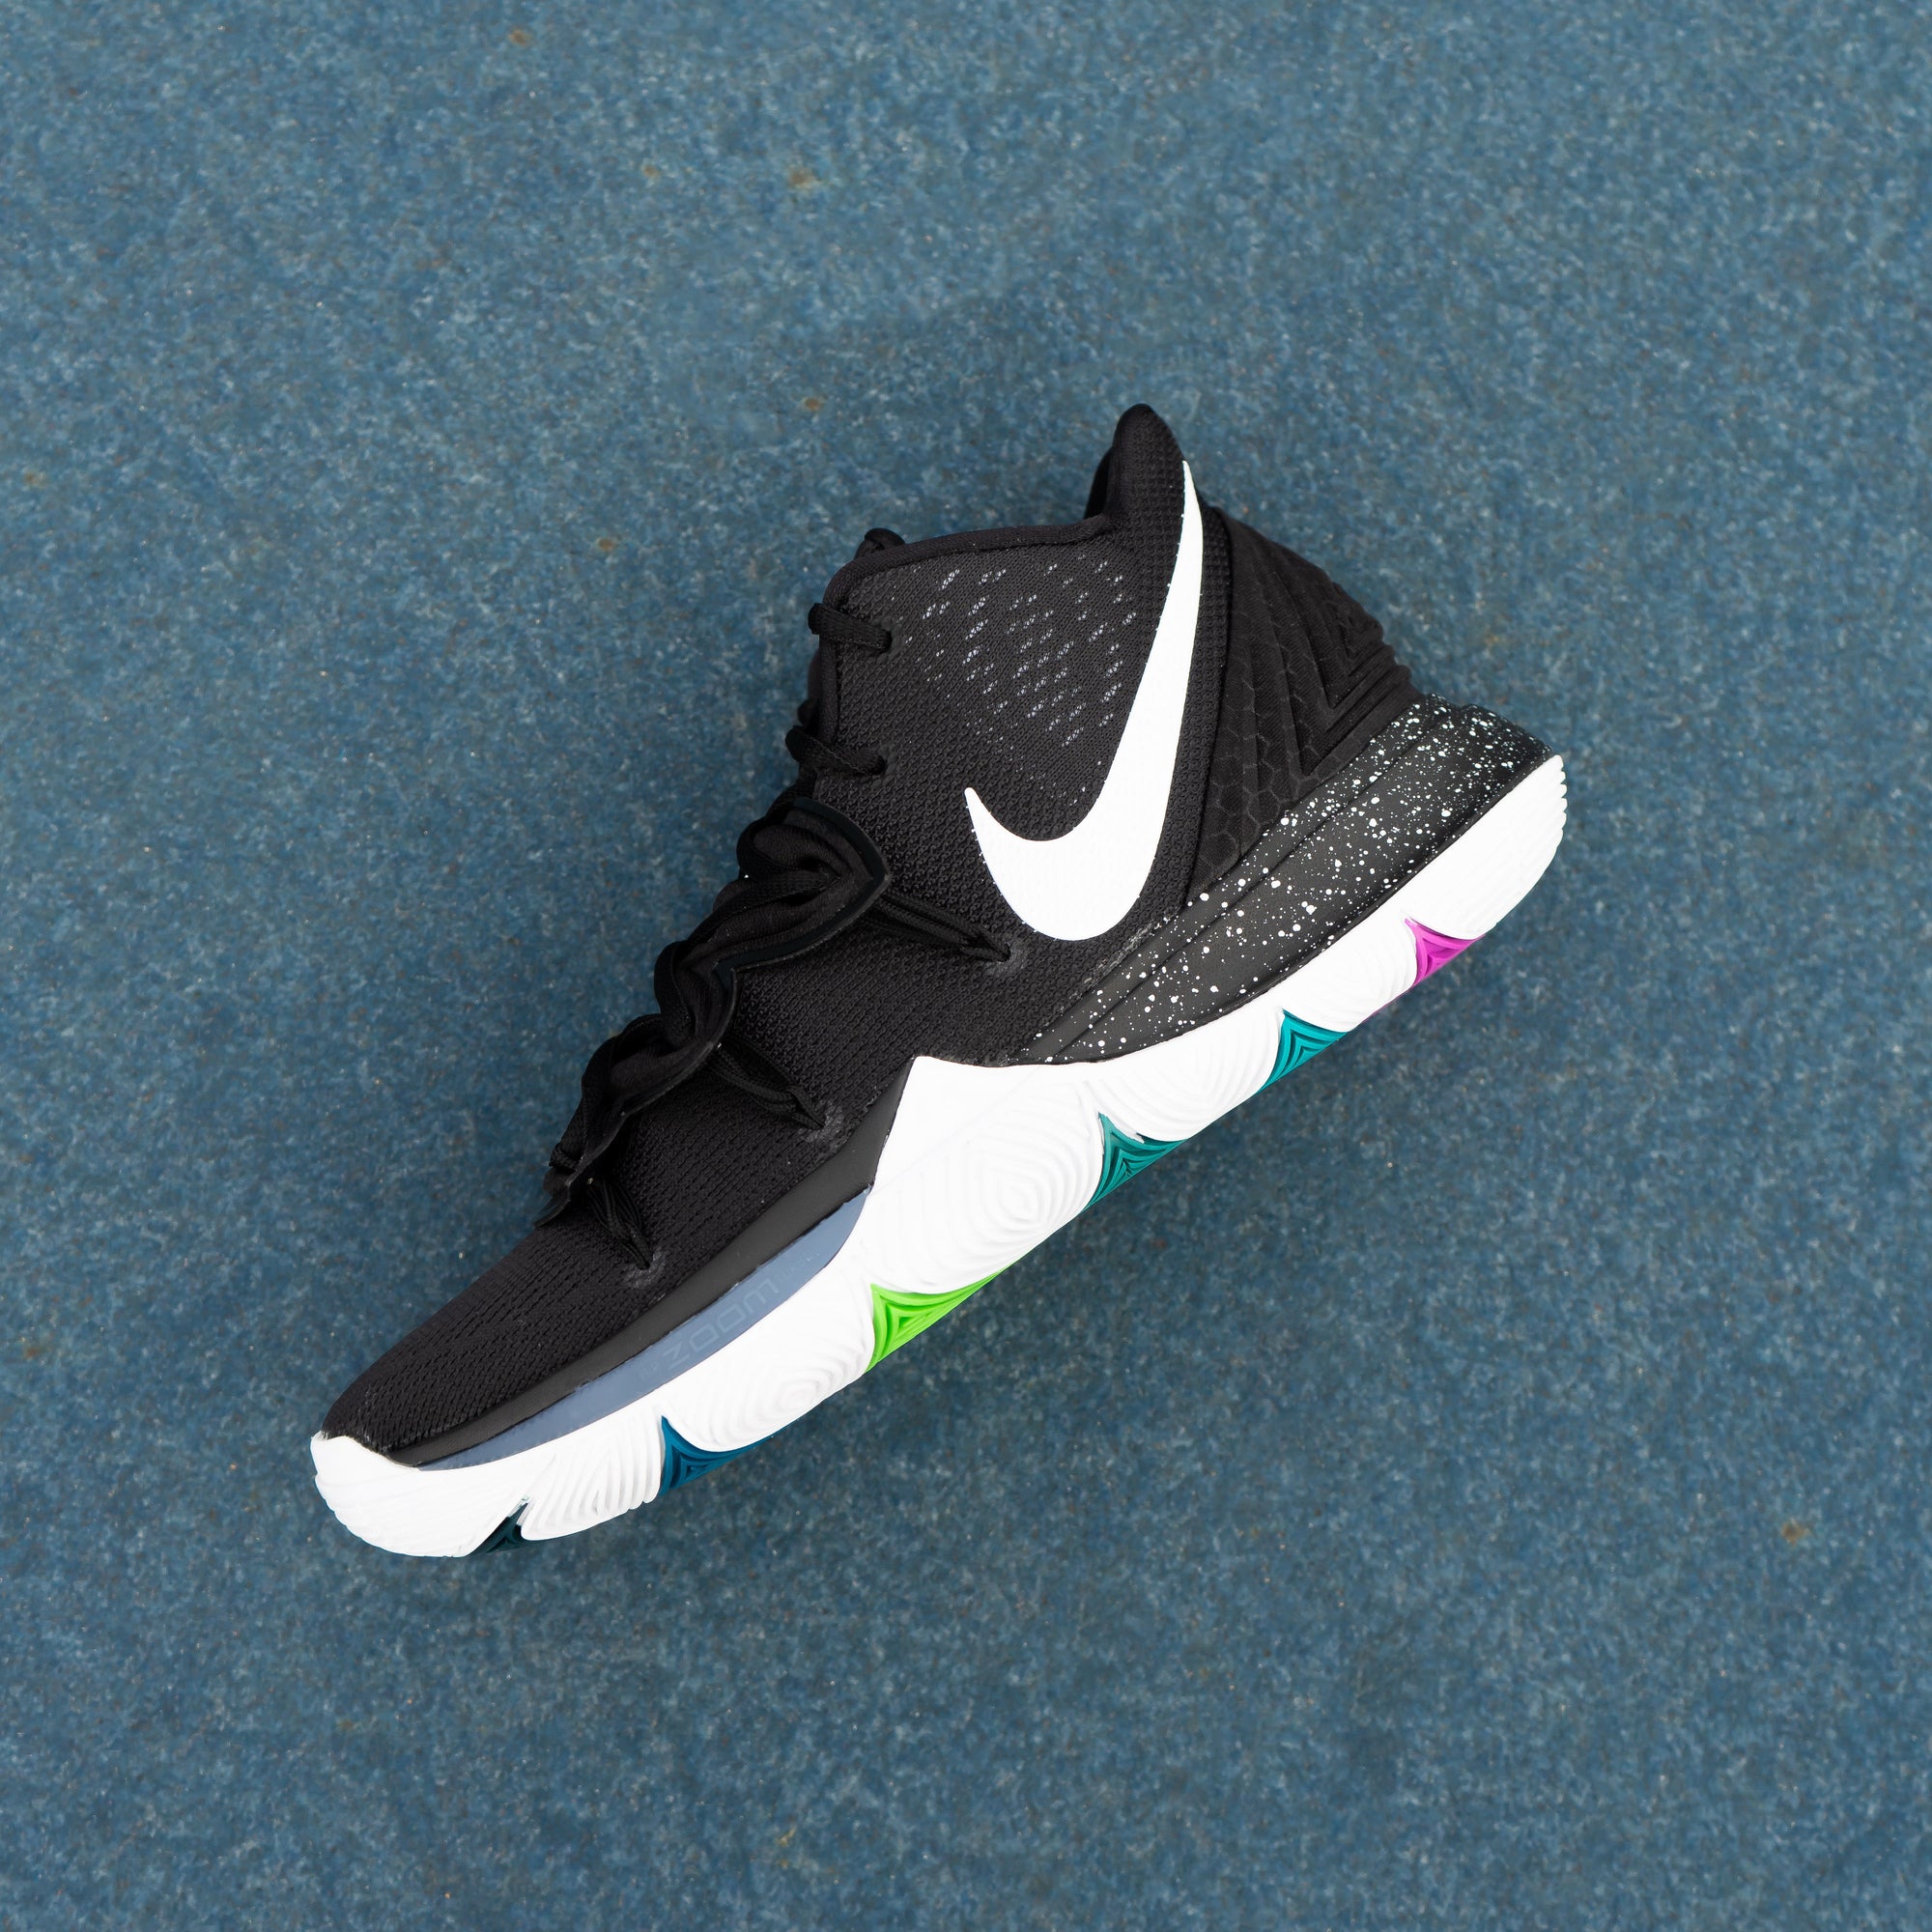 Clothing Shoes Accessories Men 's Shoes 2019 NIKE KYRIE 5